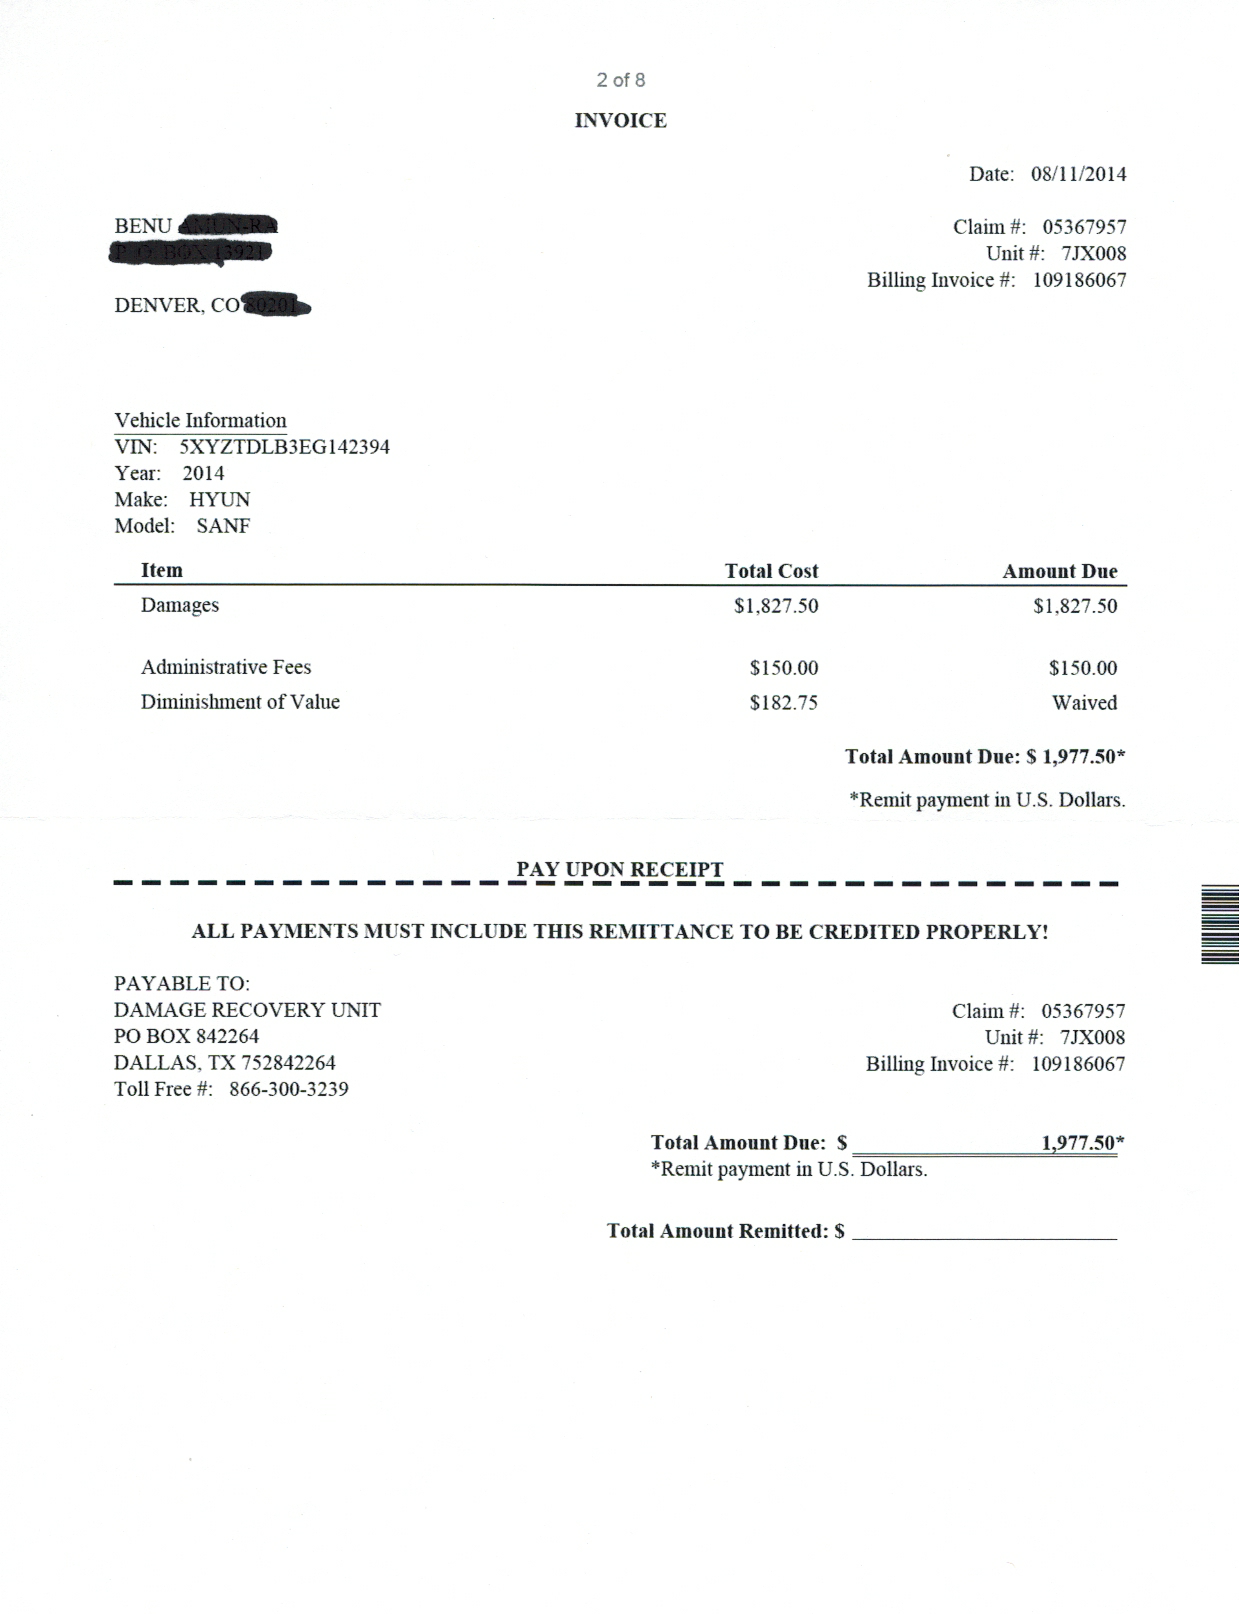 Invoice with total $1977.50